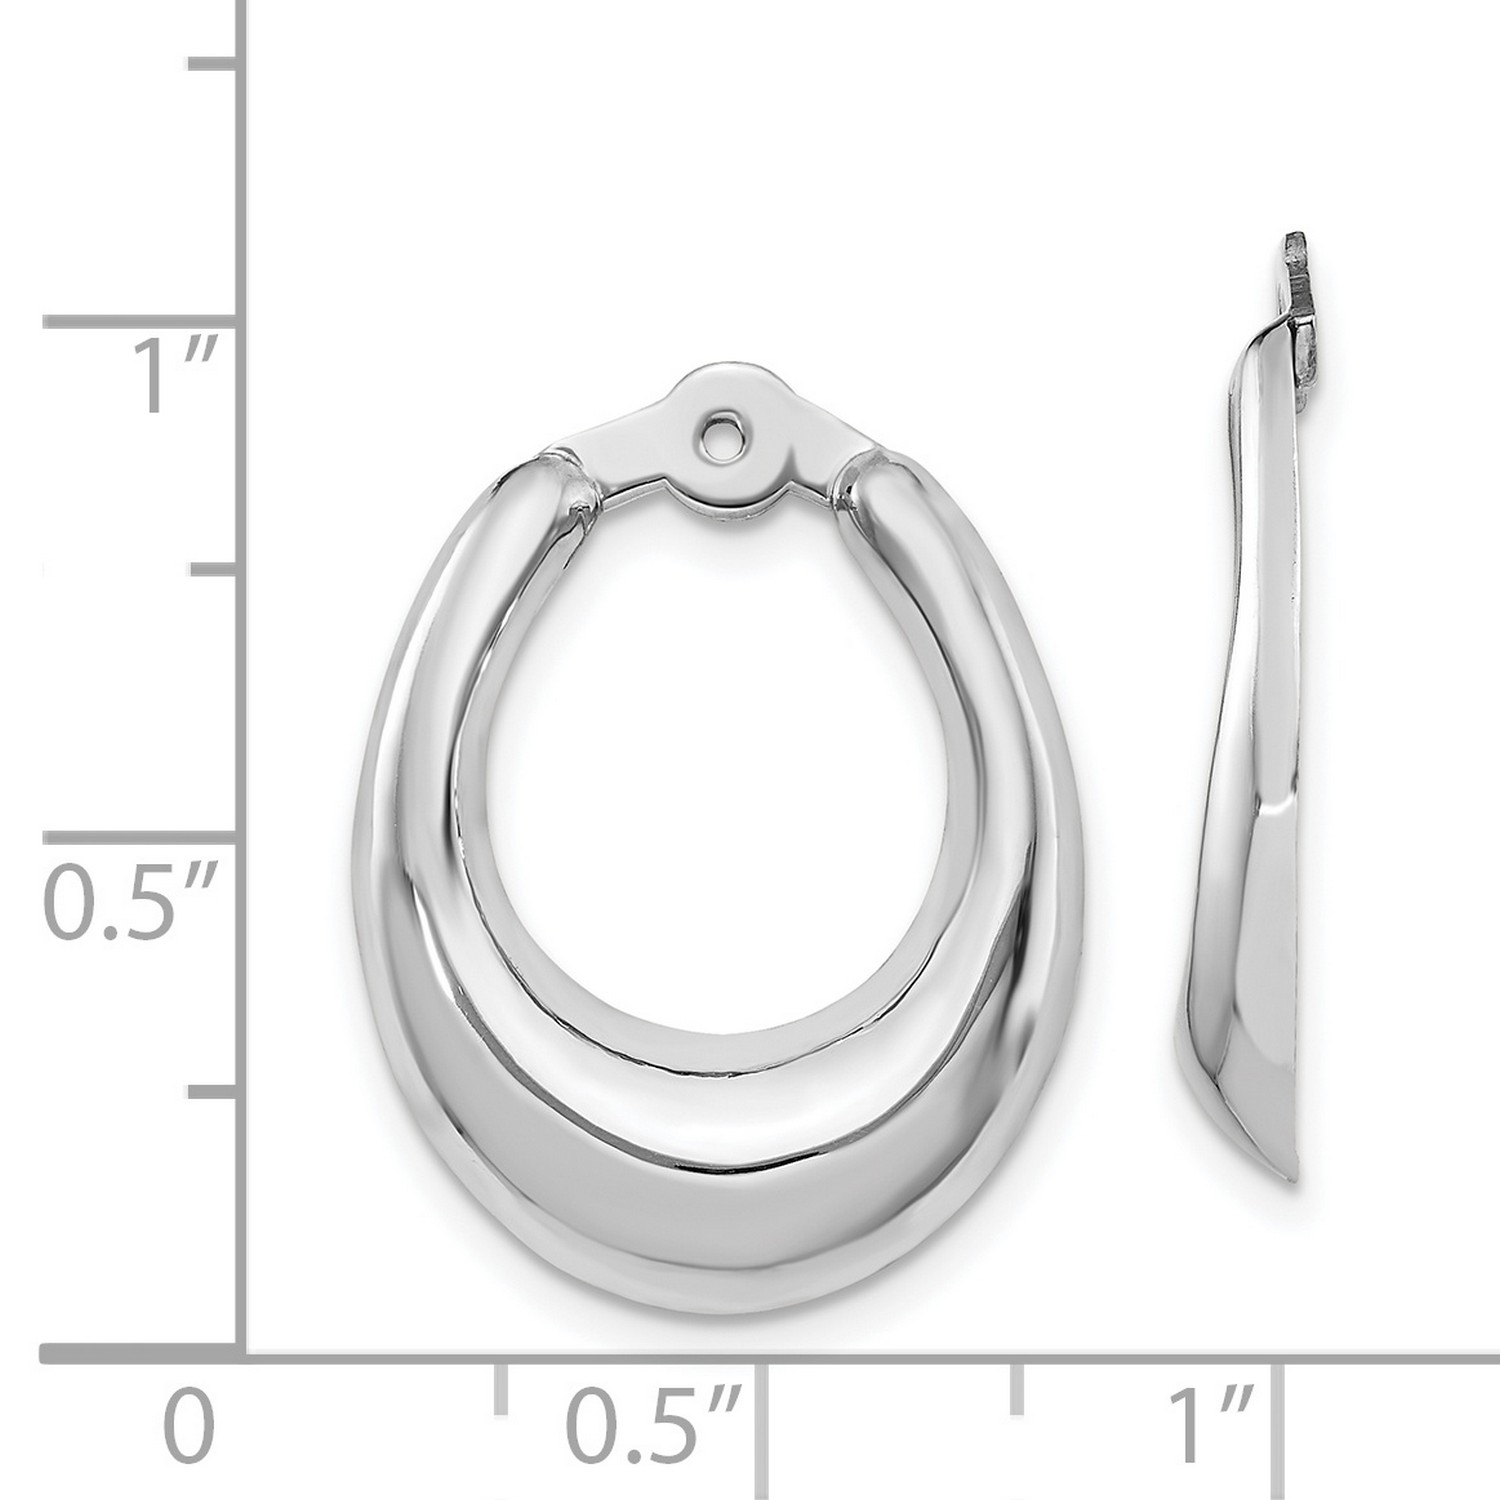 14k White Gold Polished Hoop Earring Jackets 25x18 mm - image 3 of 5